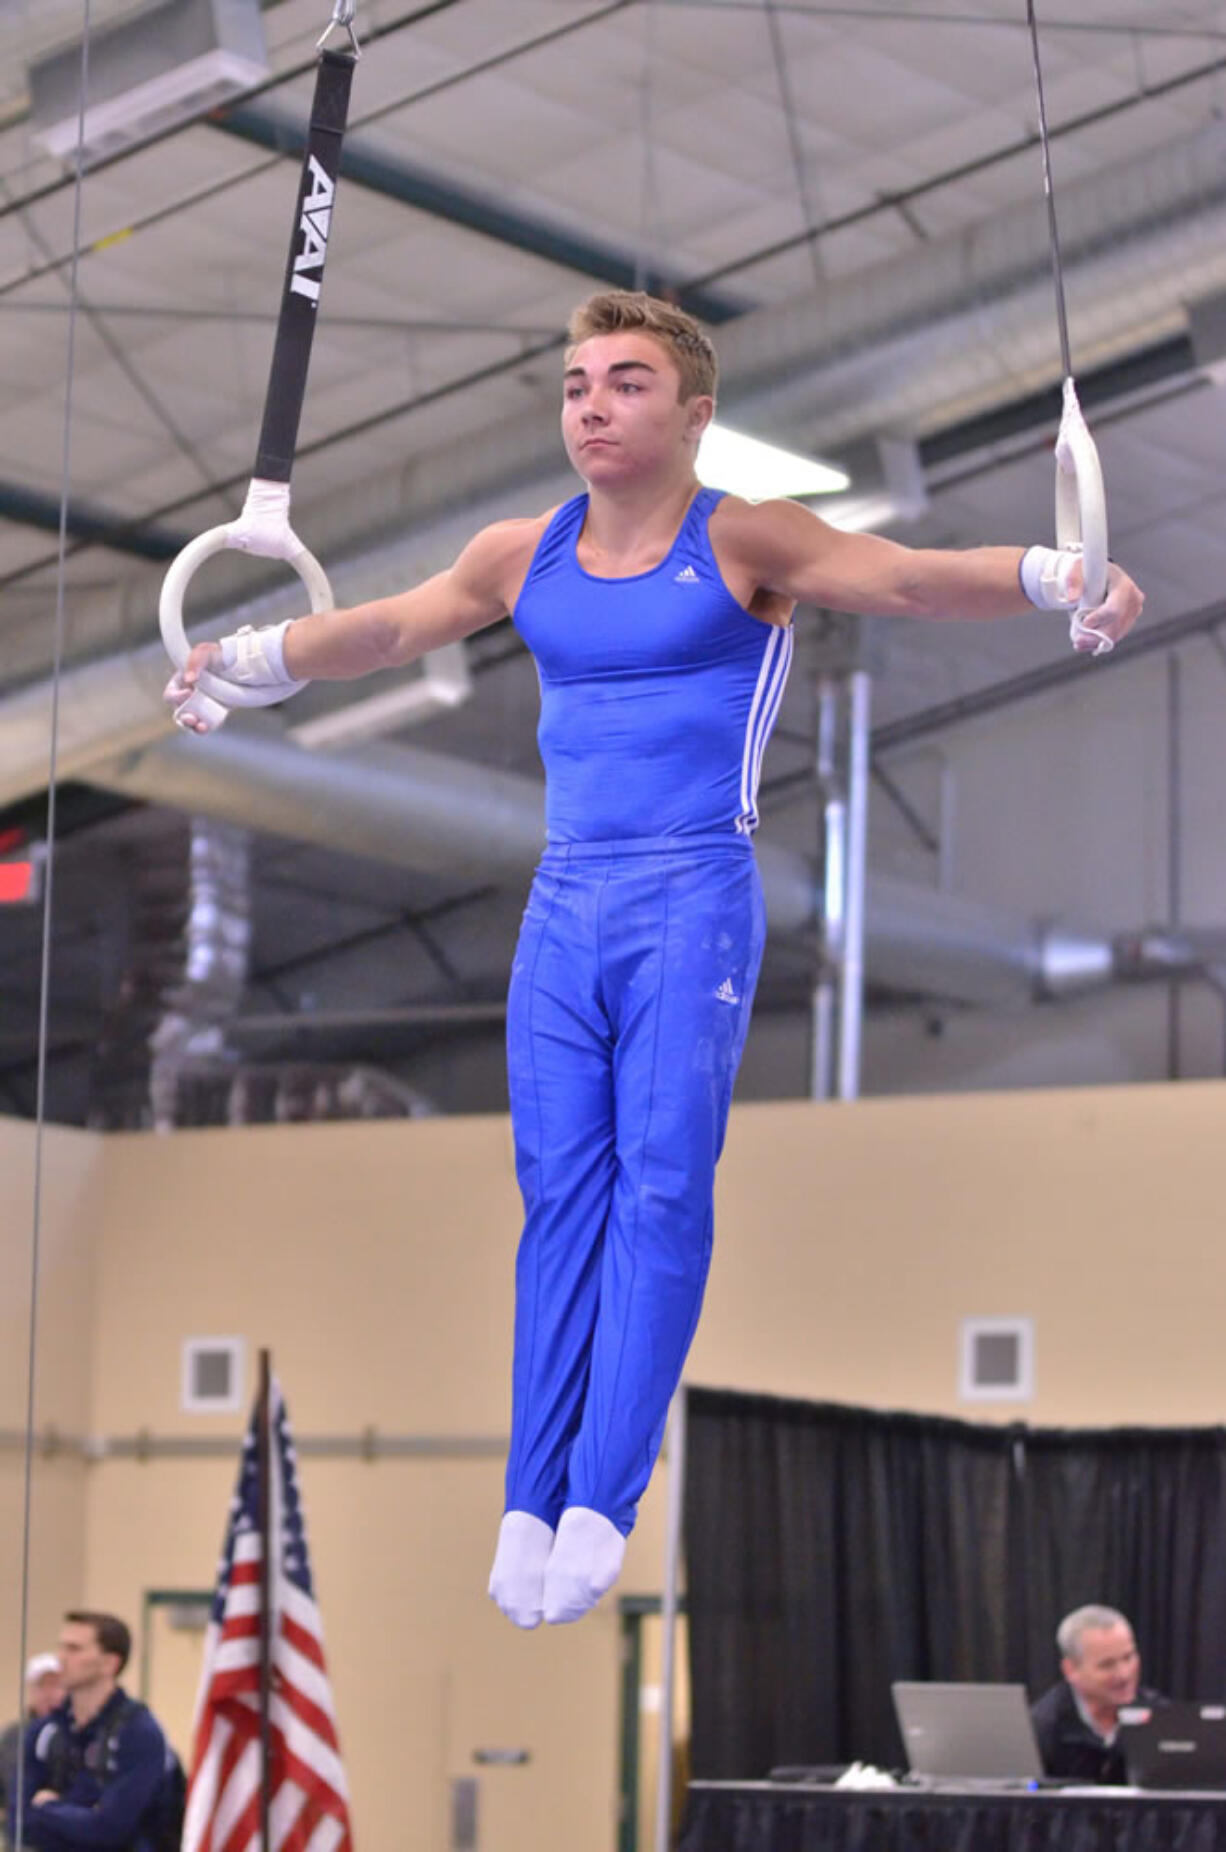 Nick McAfee performs the iron cross on the rings.